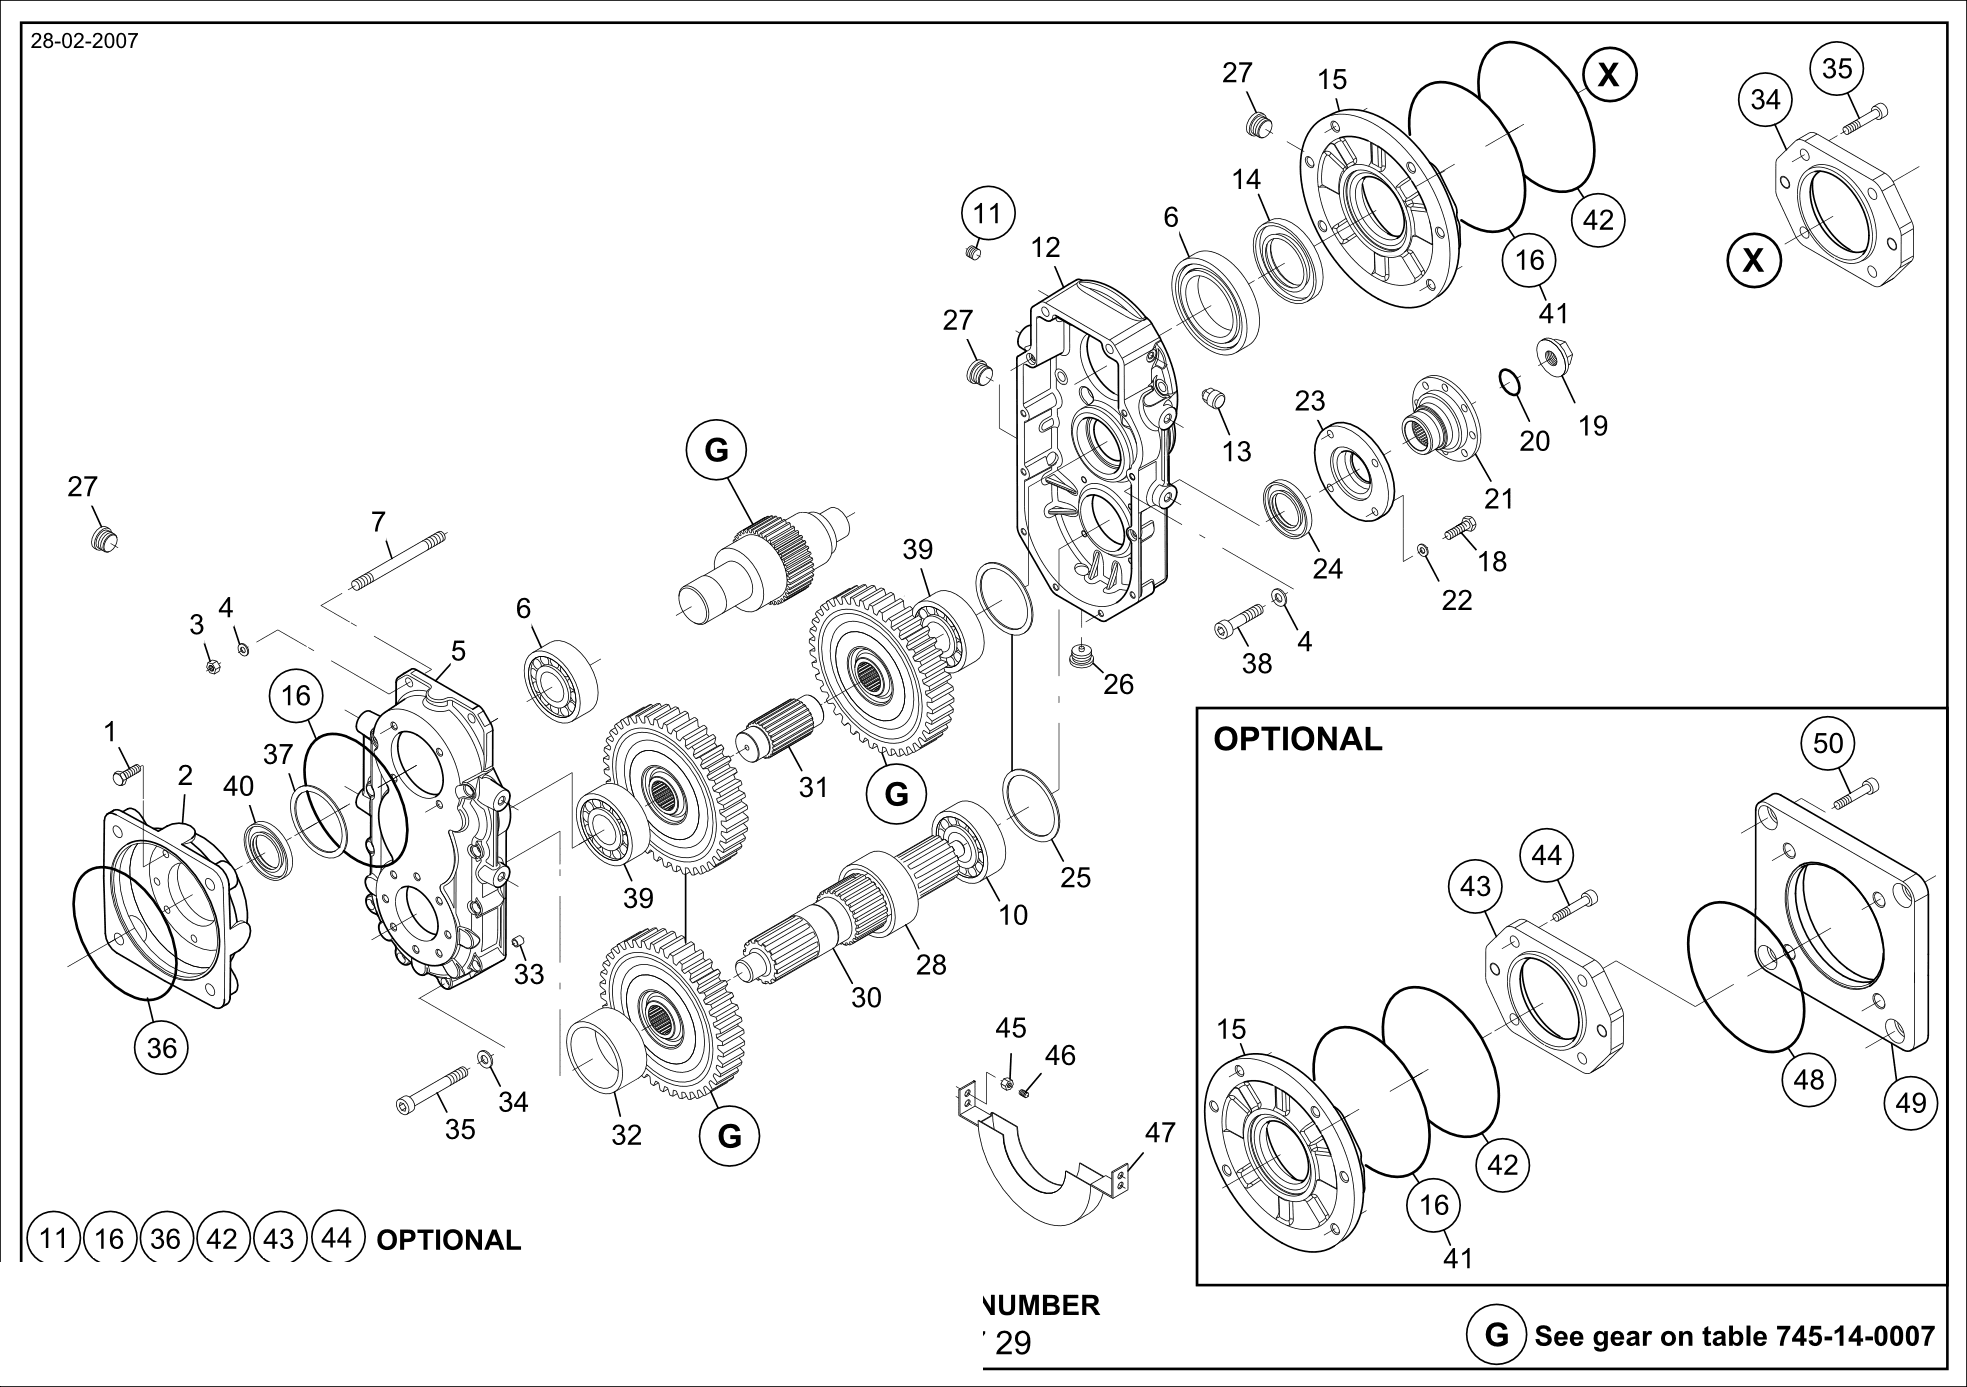 drawing for PAUS 513488 - GEAR (figure 1)